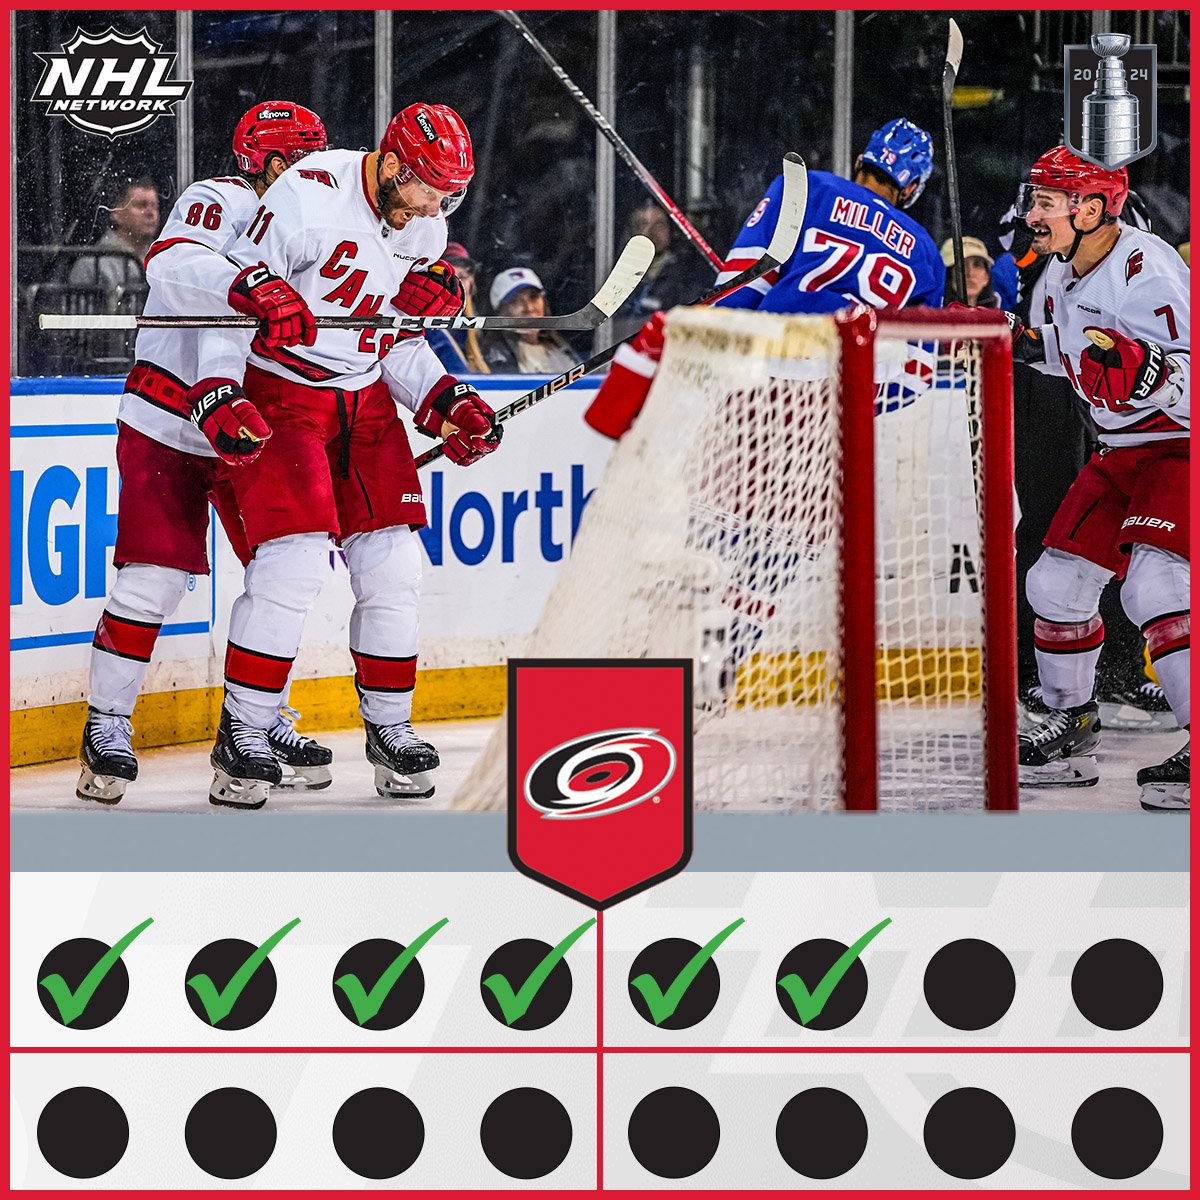 The @Canes aren't done yet! 

There will be a Game 6 in Raleigh! 

#CauseChaos | #StanleyCup